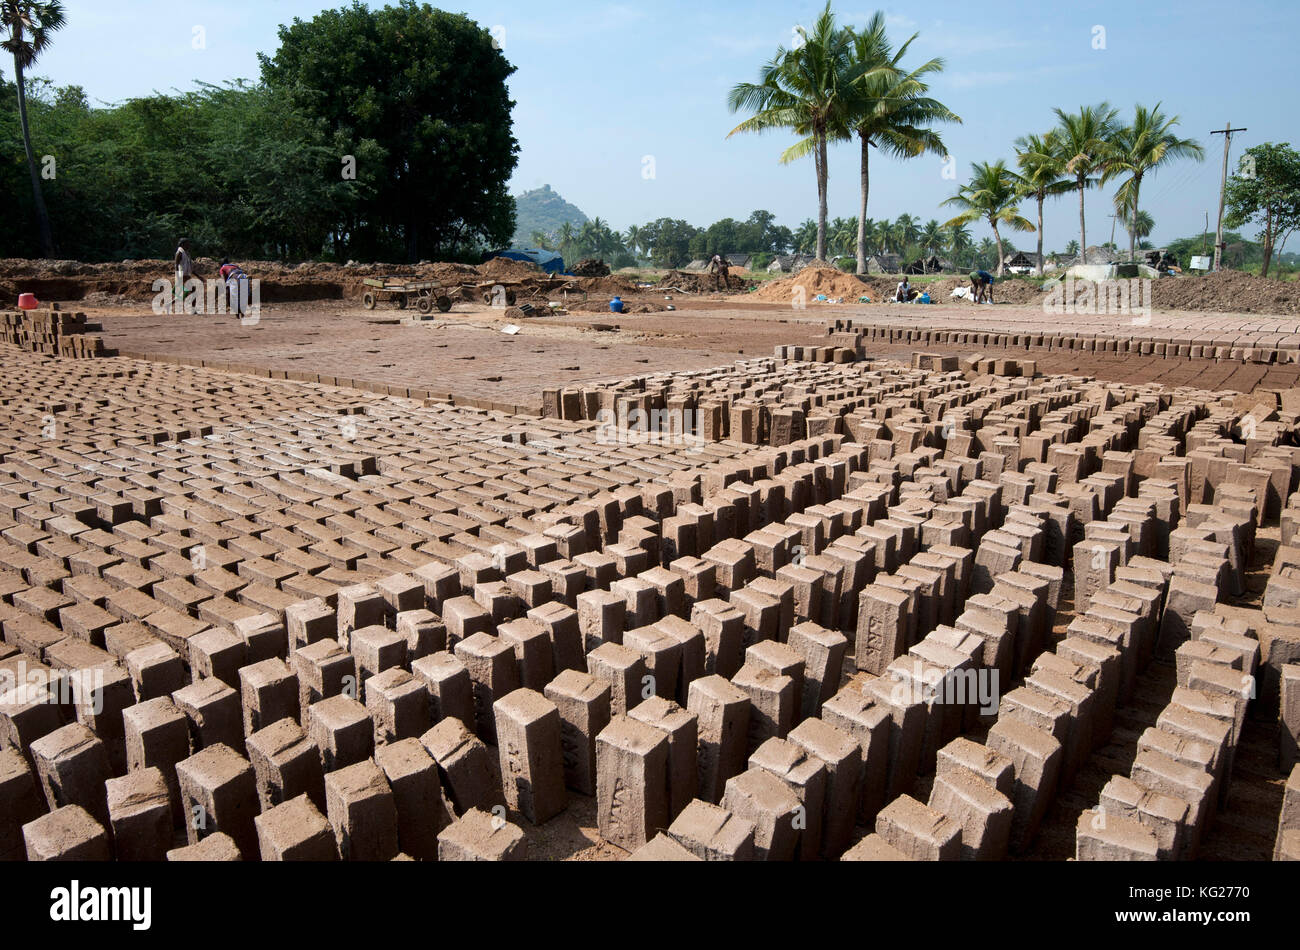 Bricks being made by hand out of roadside clay, Tamil Nadu, India, Asia Stock Photo